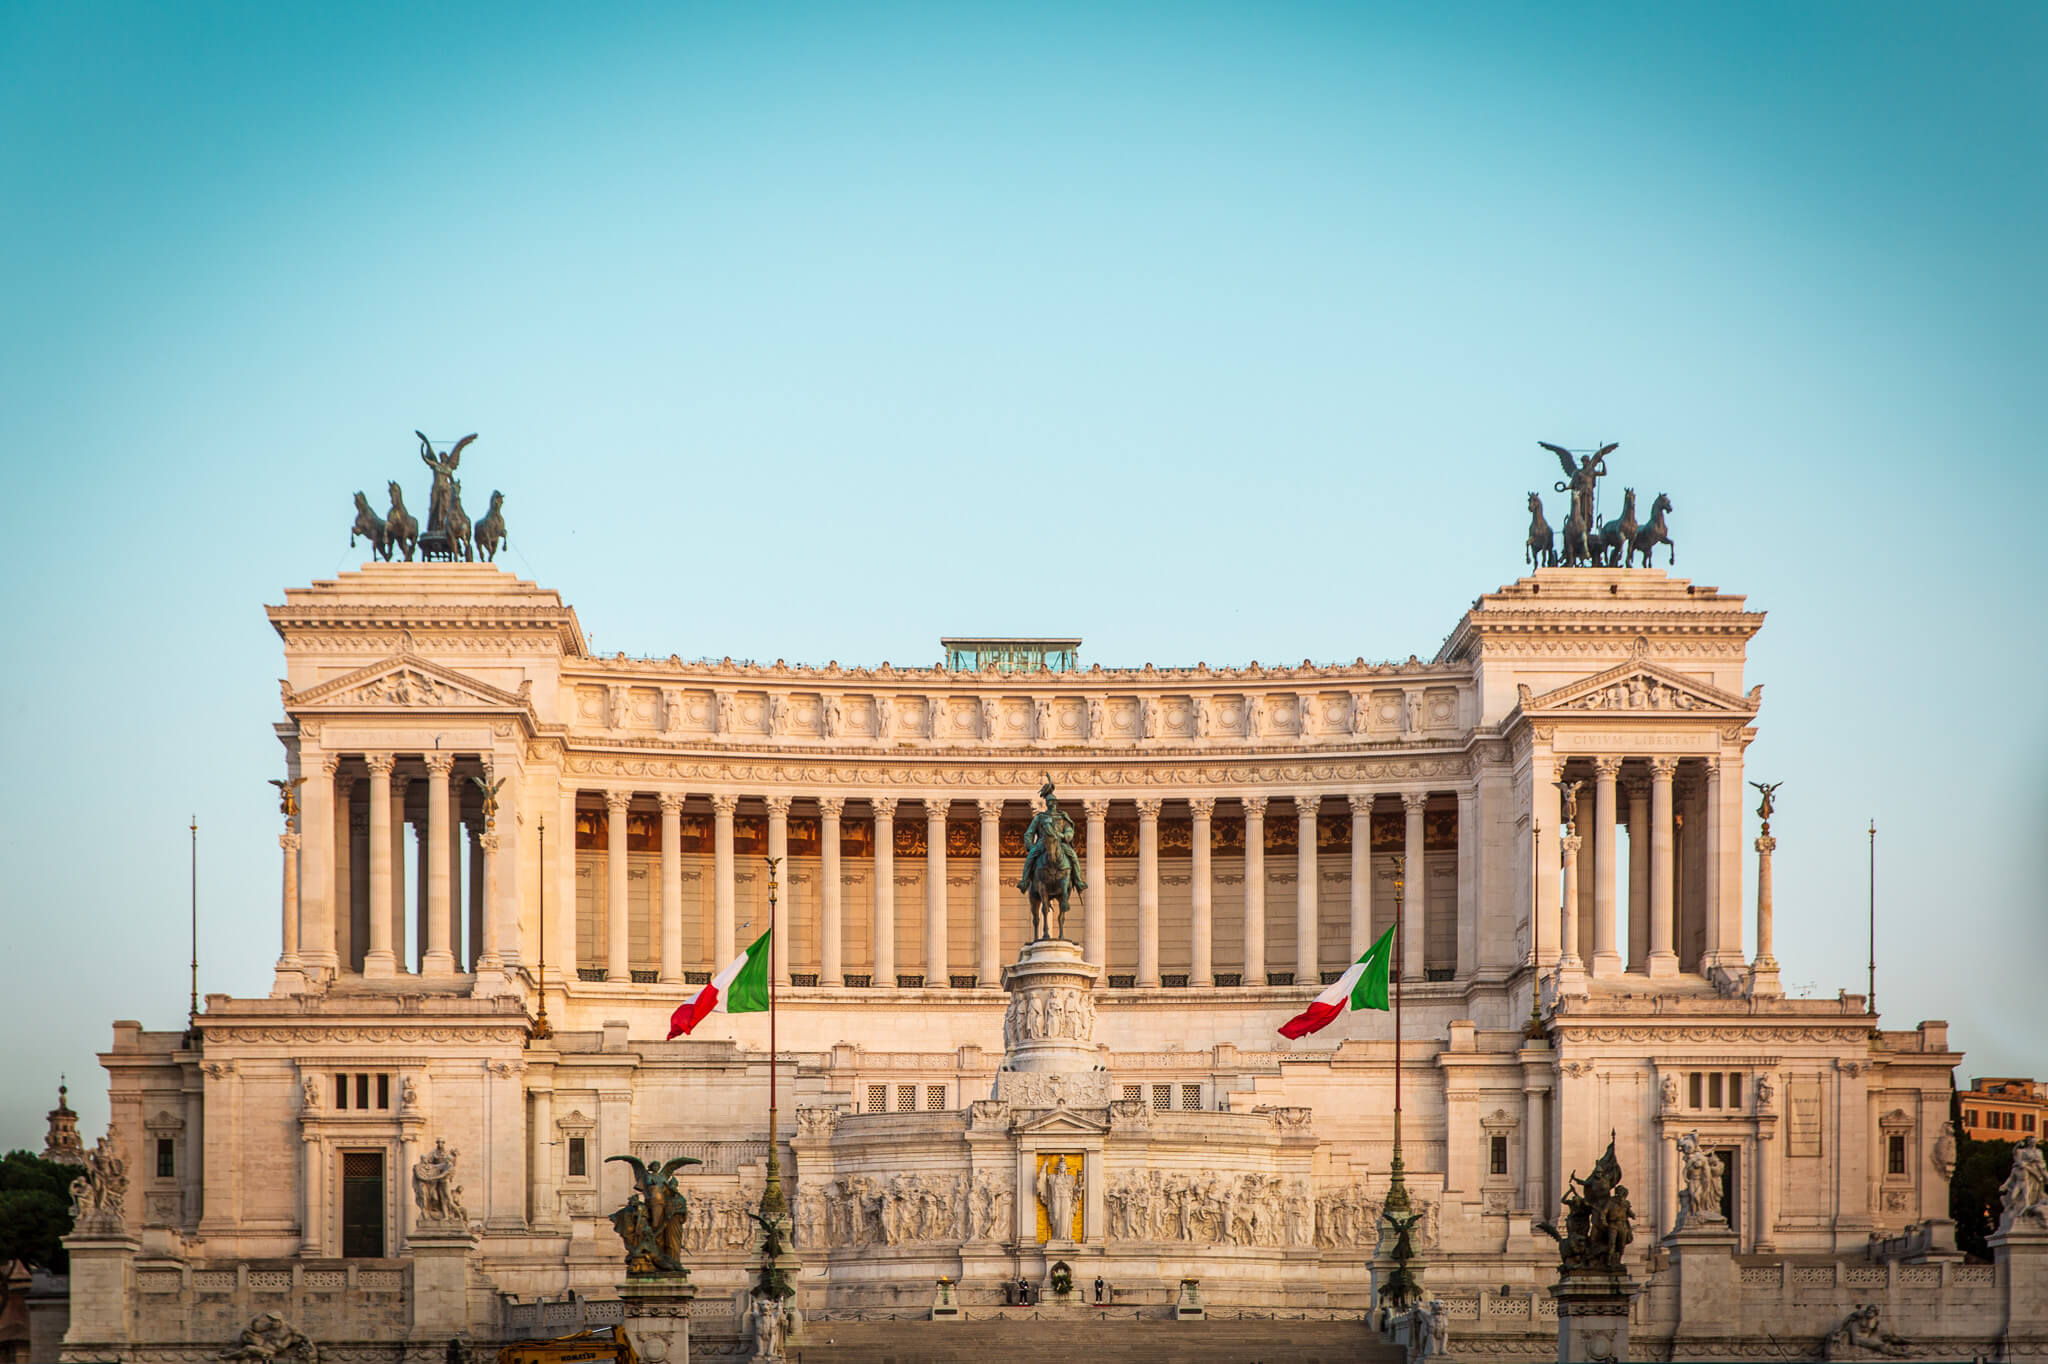 The Victor Emmanuel II monument in Rome